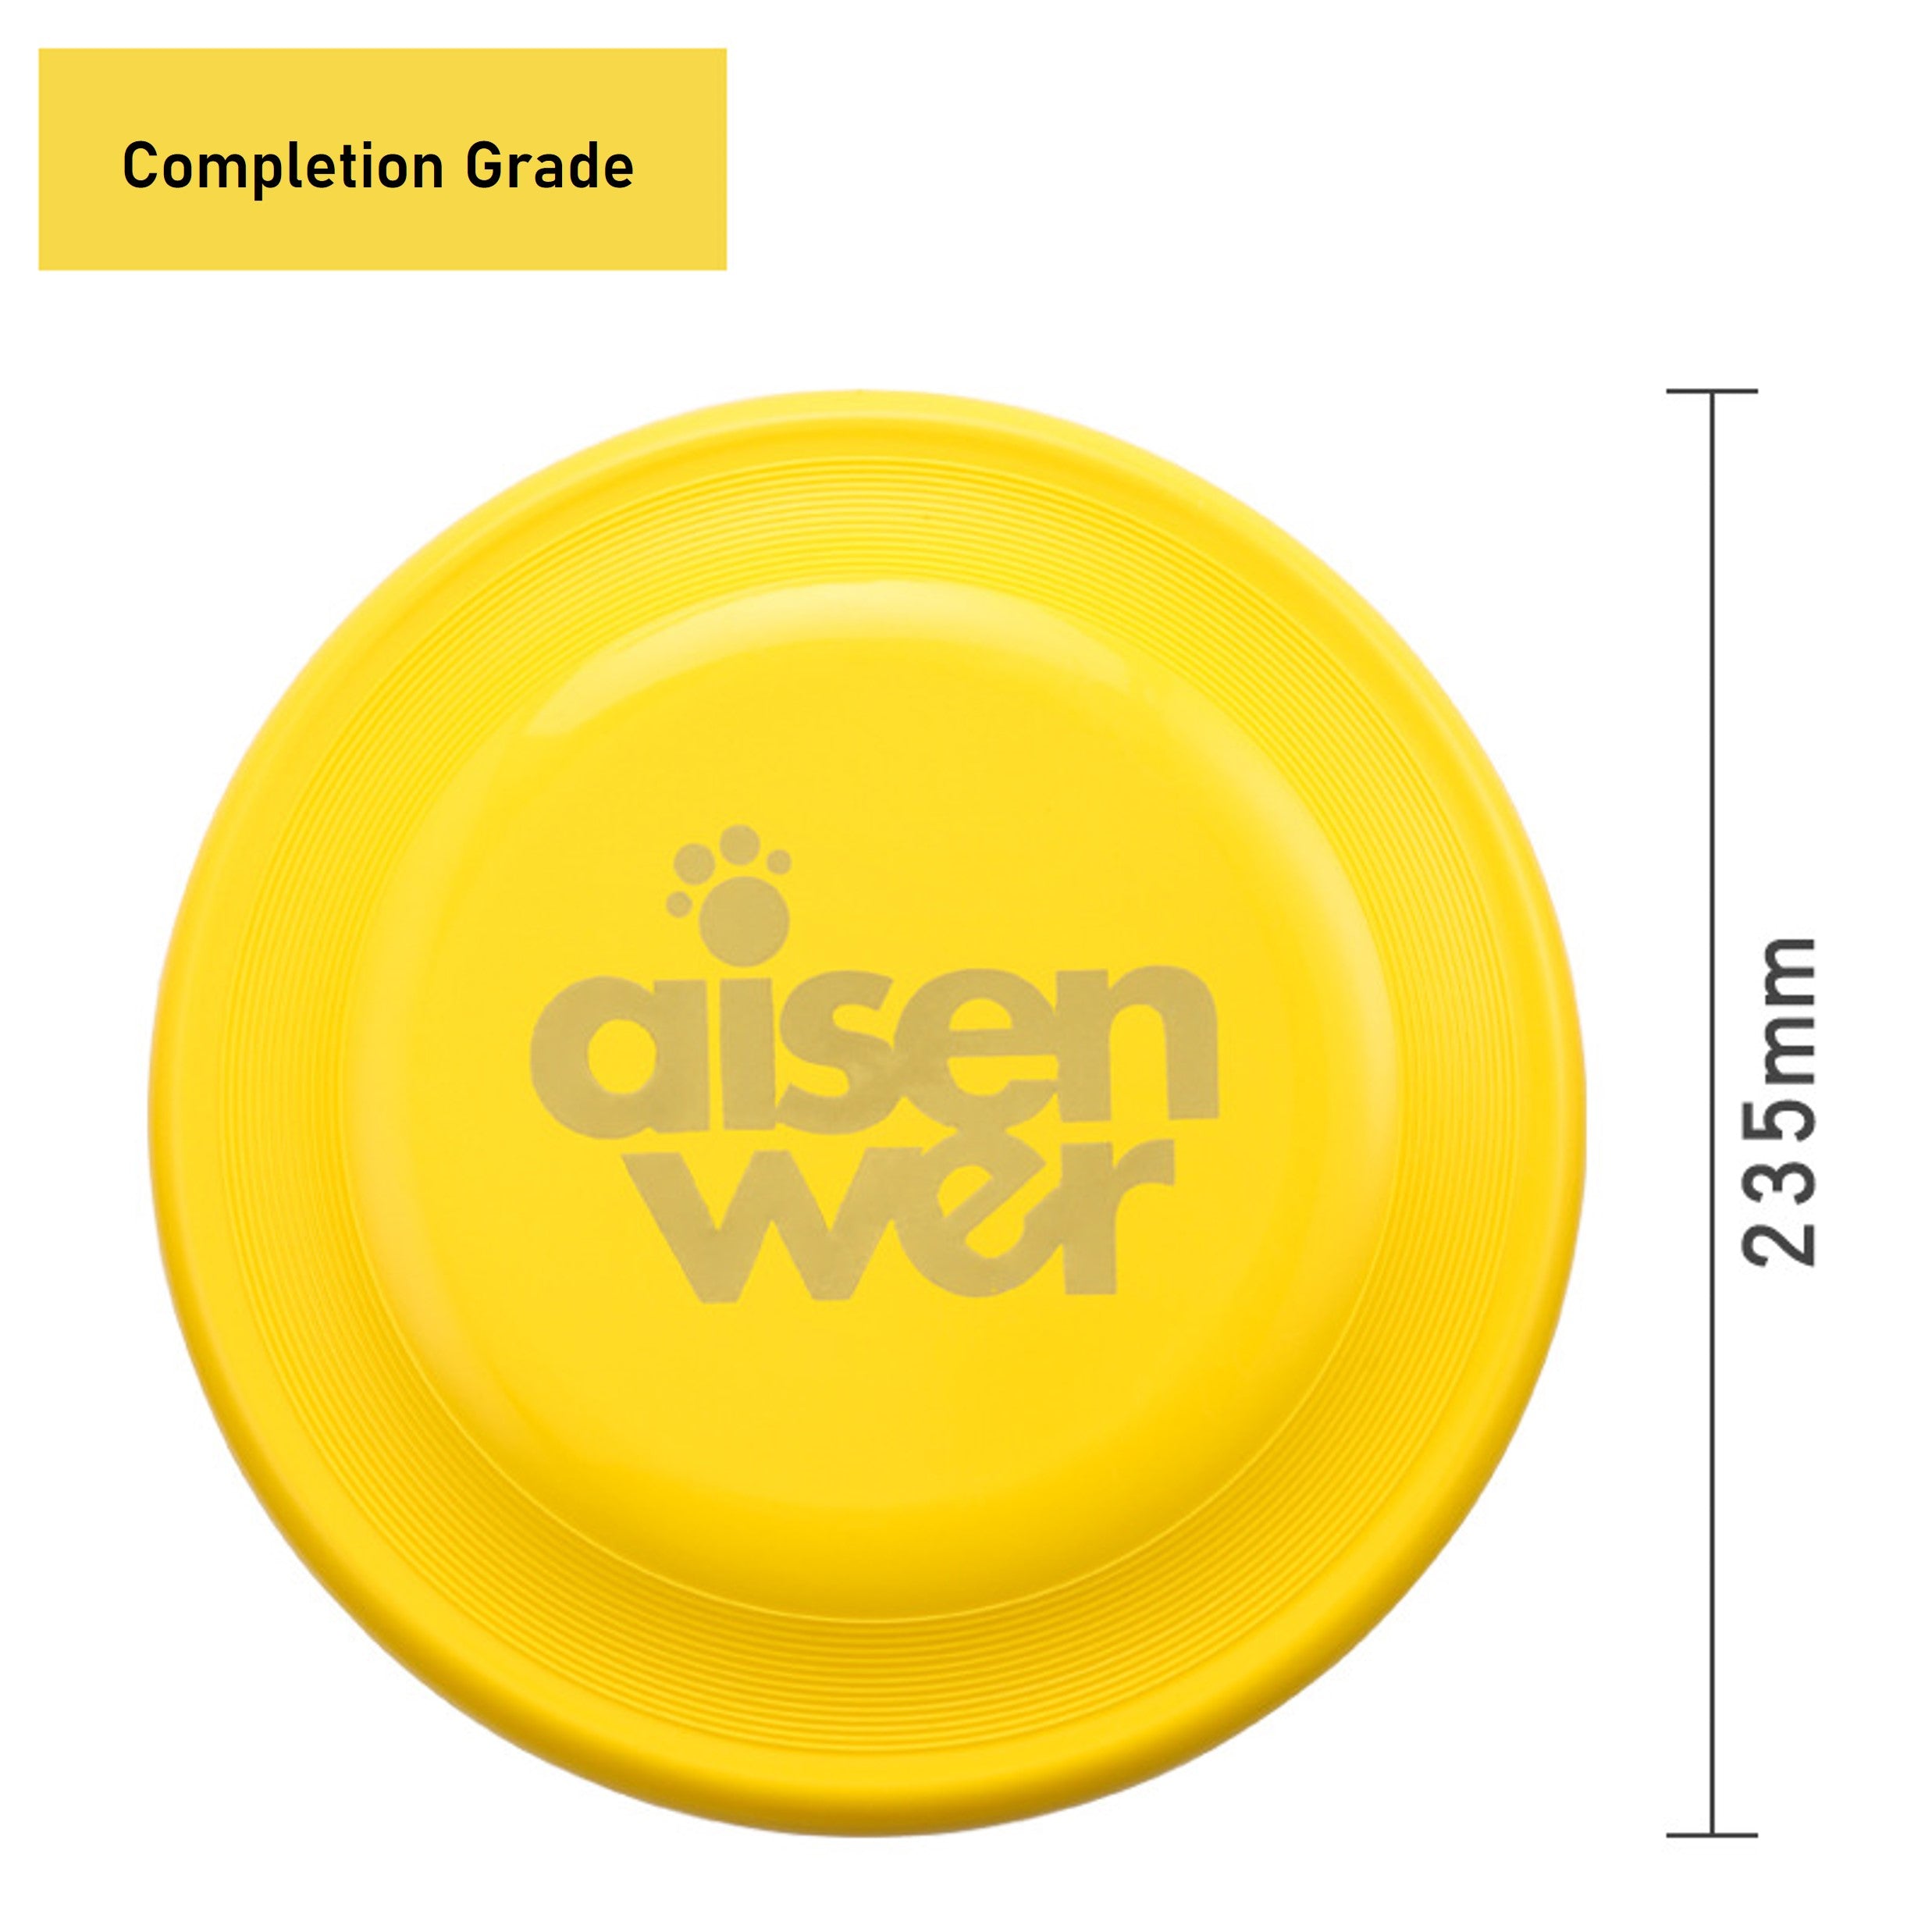 Aisenwer Flying Disc for Dogs Completion Grade